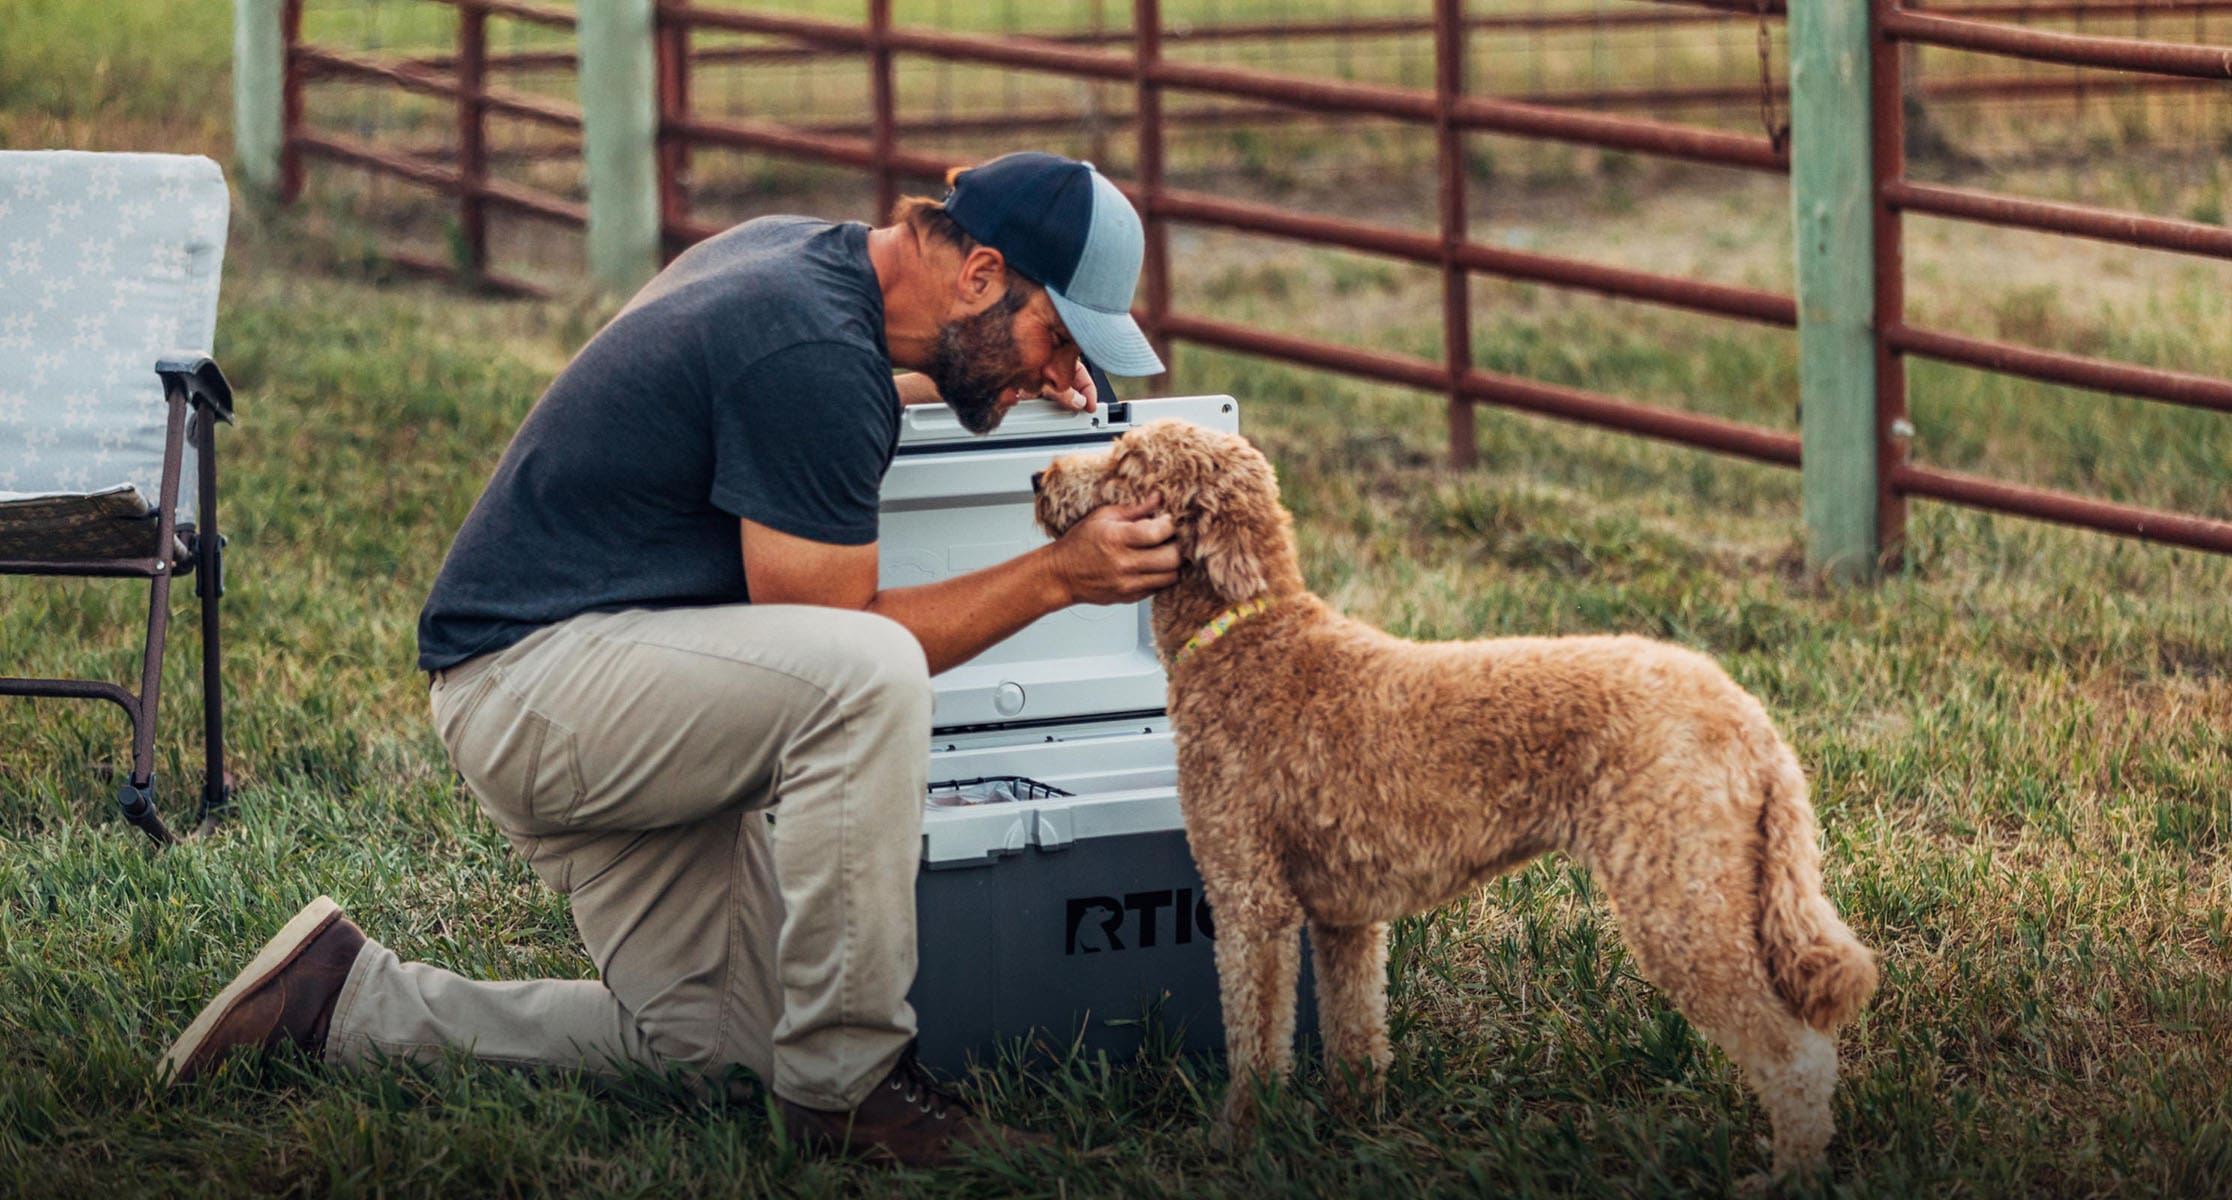 RTIC Launches The 32 Quart Ultra-Light Cooler - Forbes Vetted